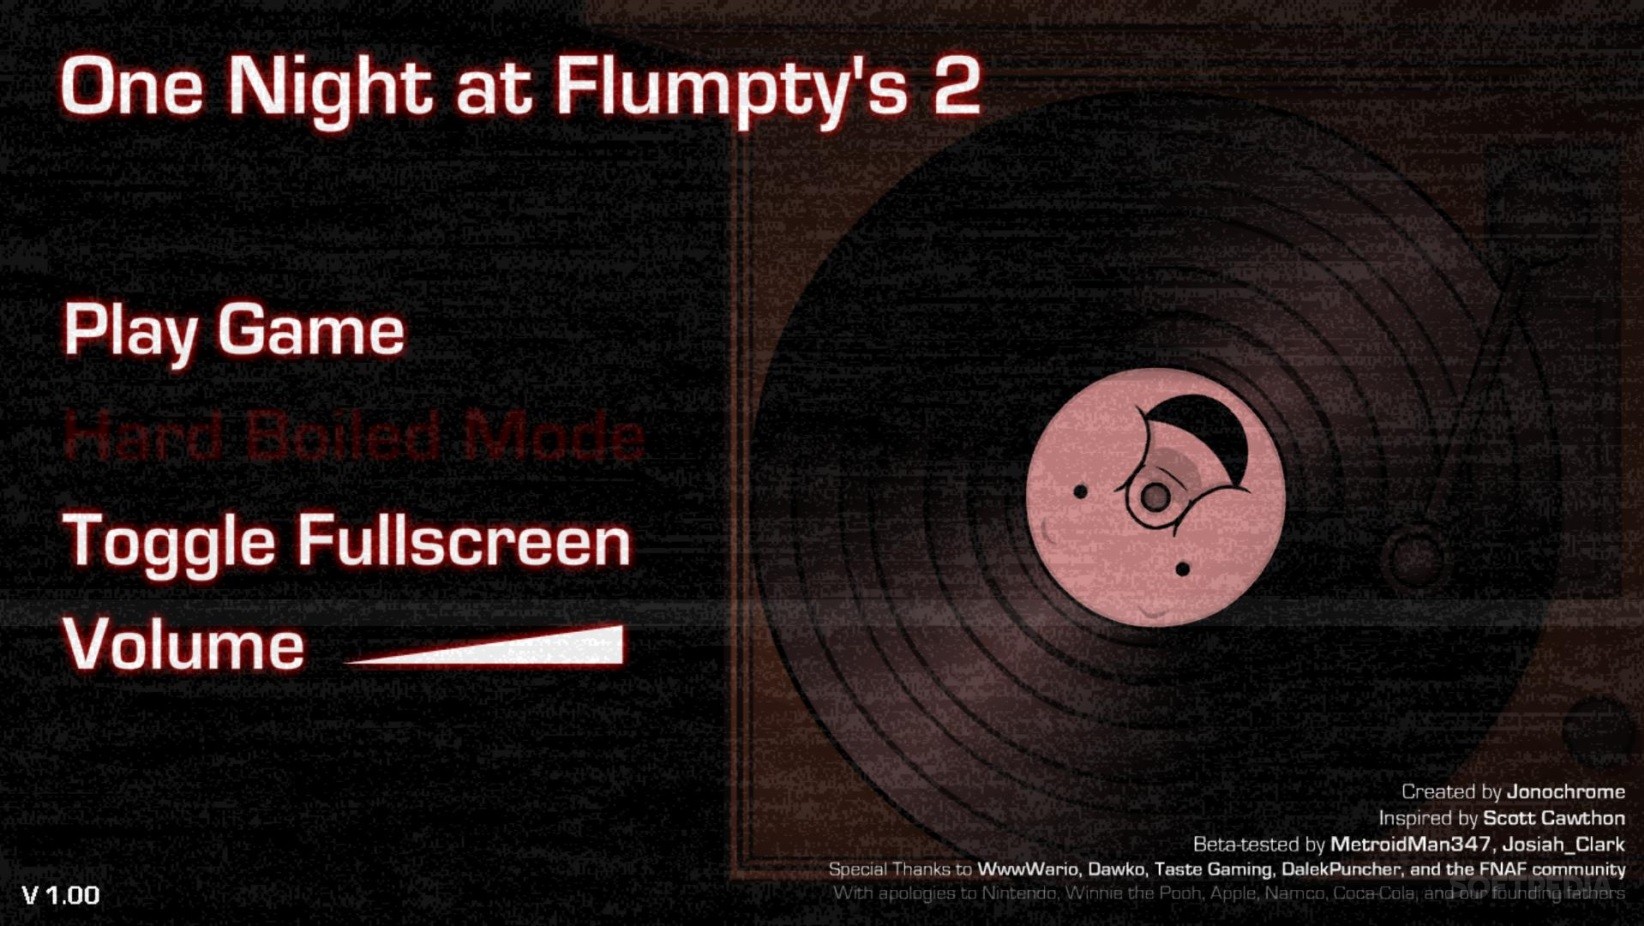 One Night at Flumpty's 2 Download & Review